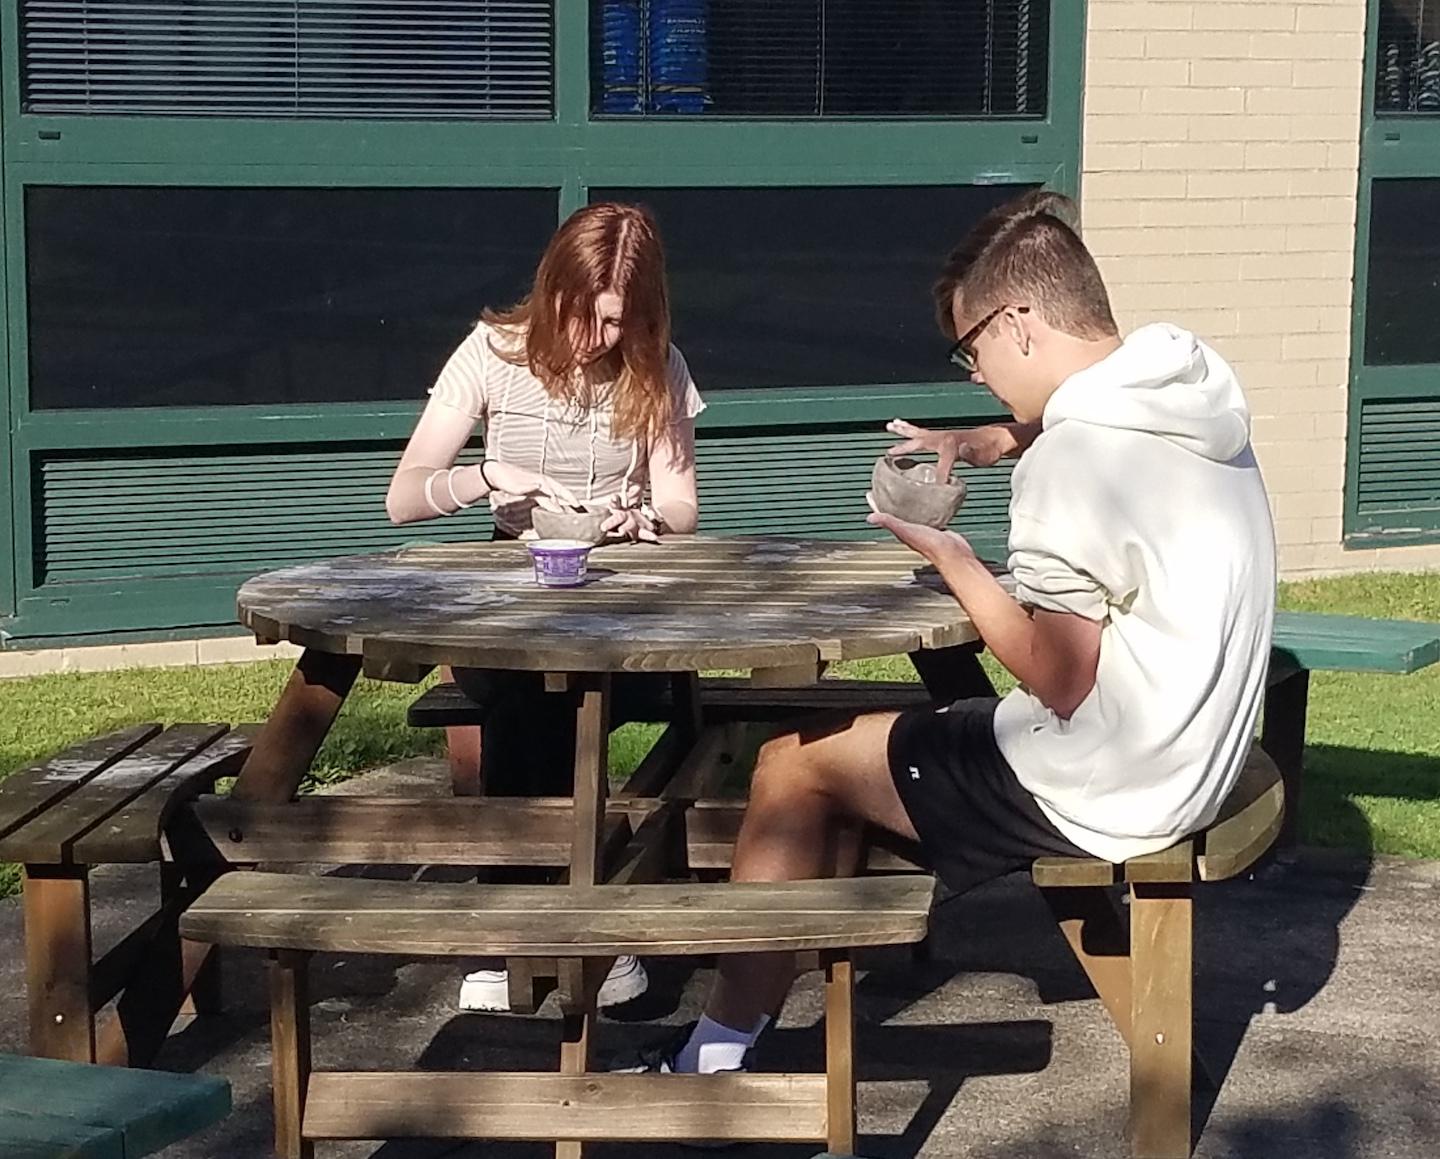 11th-graders Ruby Wright and Braeden Simon work on ceramics projects